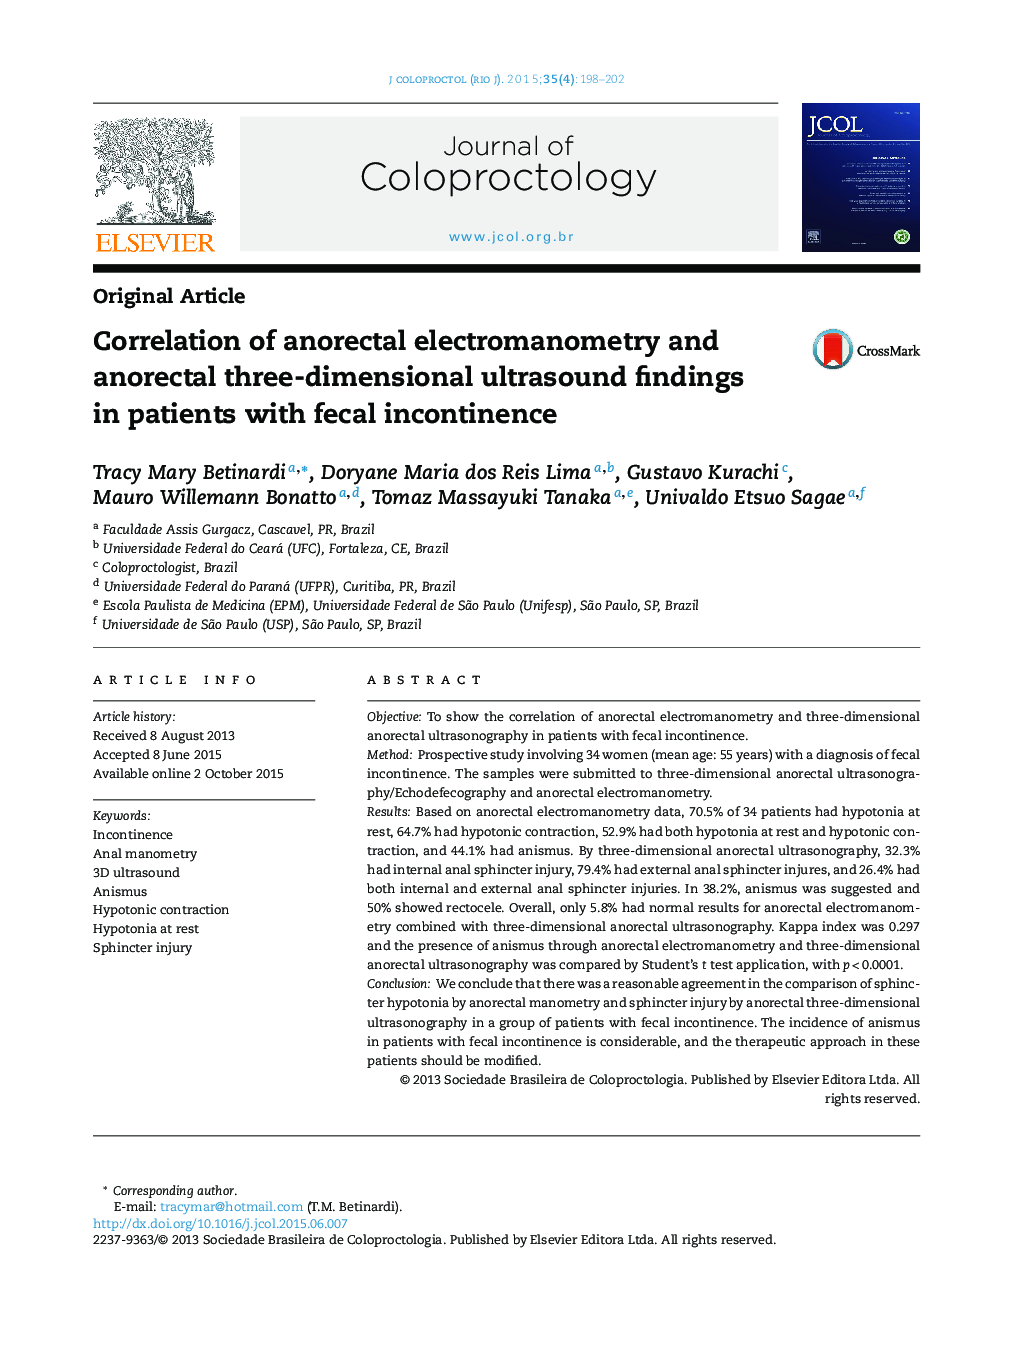 Correlation of anorectal electromanometry and anorectal three-dimensional ultrasound findings in patients with fecal incontinence